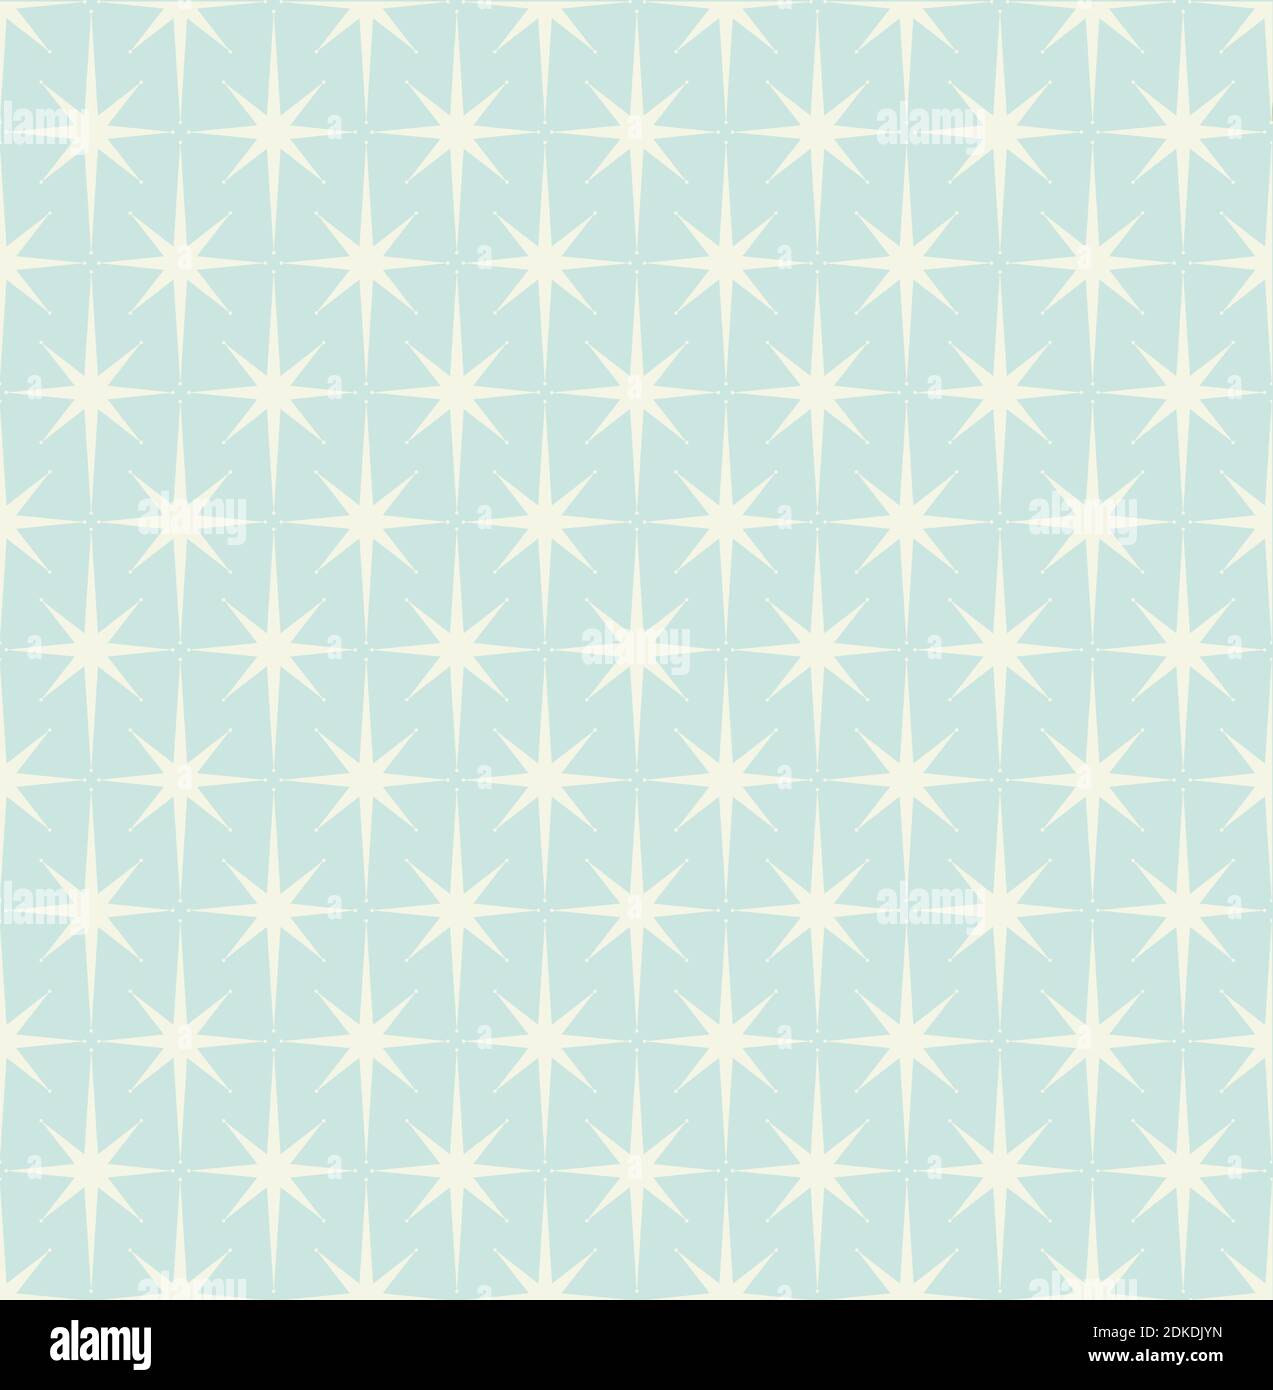 https://c8.alamy.com/comp/2DKDJYN/mid-century-modern-wrapping-paper-in-starburst-pattern-on-light-blue-background-inspired-by-atomic-era-repeatable-and-seamless-2DKDJYN.jpg